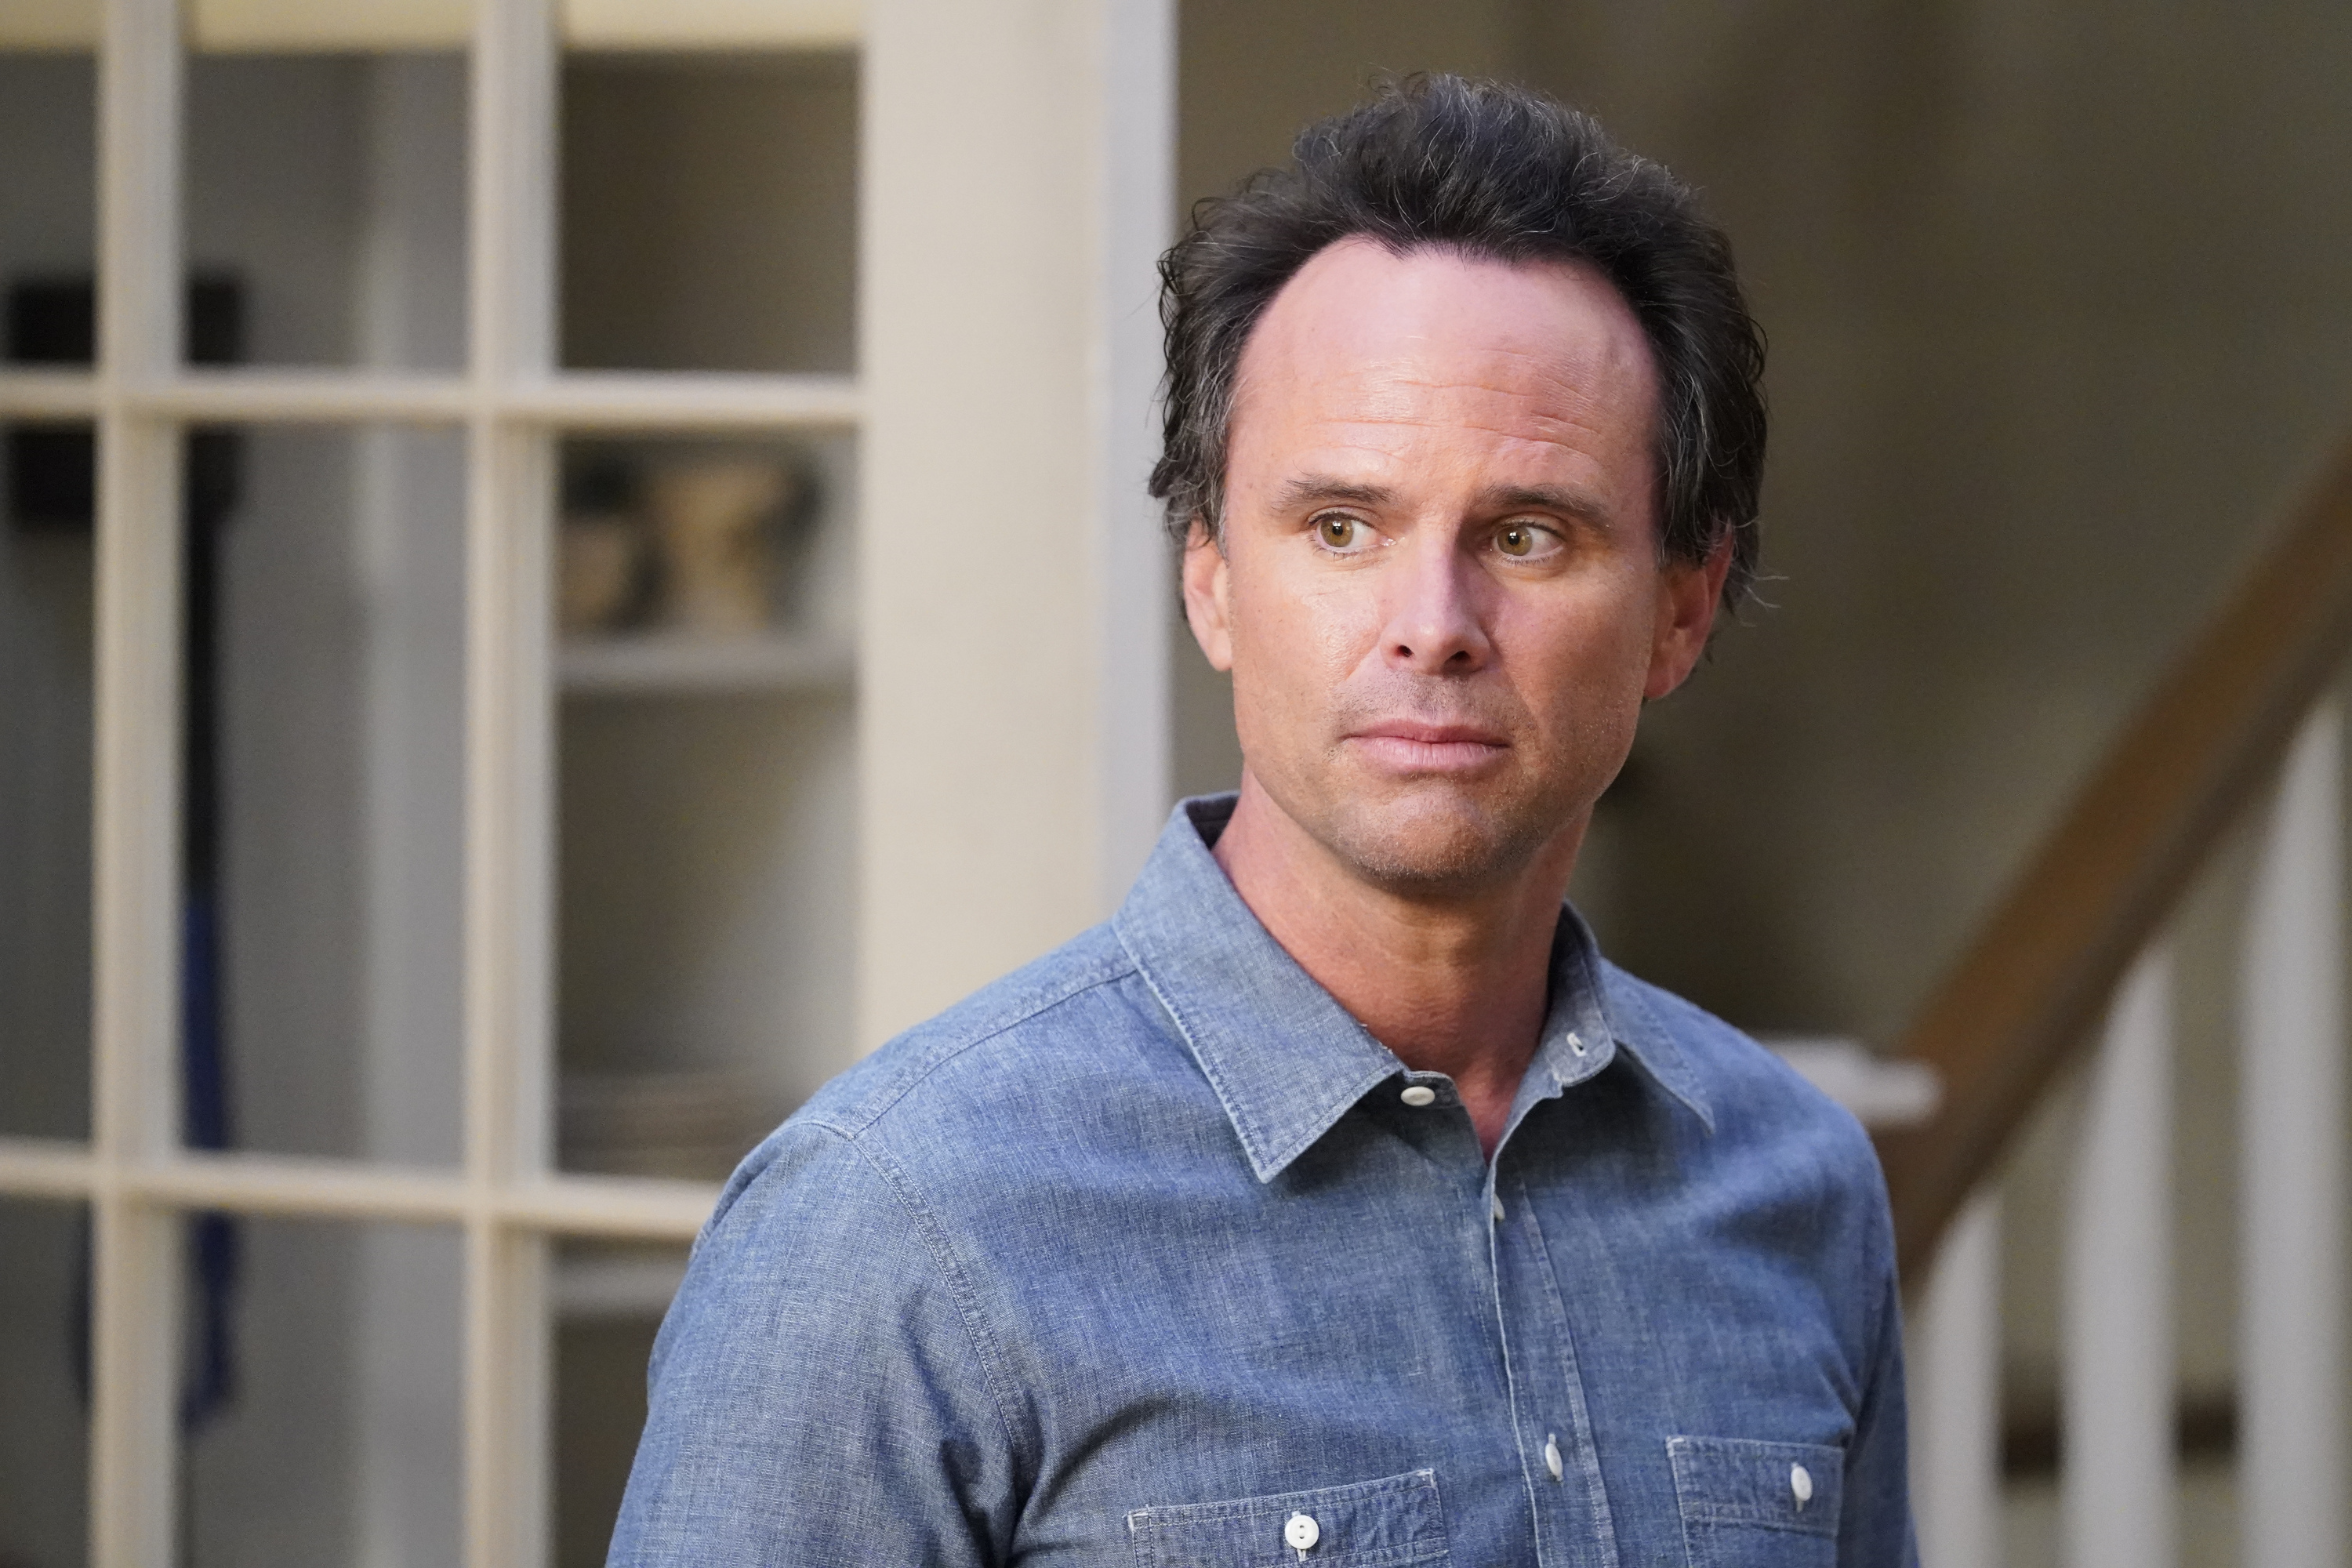 Walton Goggins as Wade Felton on CBS's "The Unicorn" on January 13, 2021. | Source: Getty Images